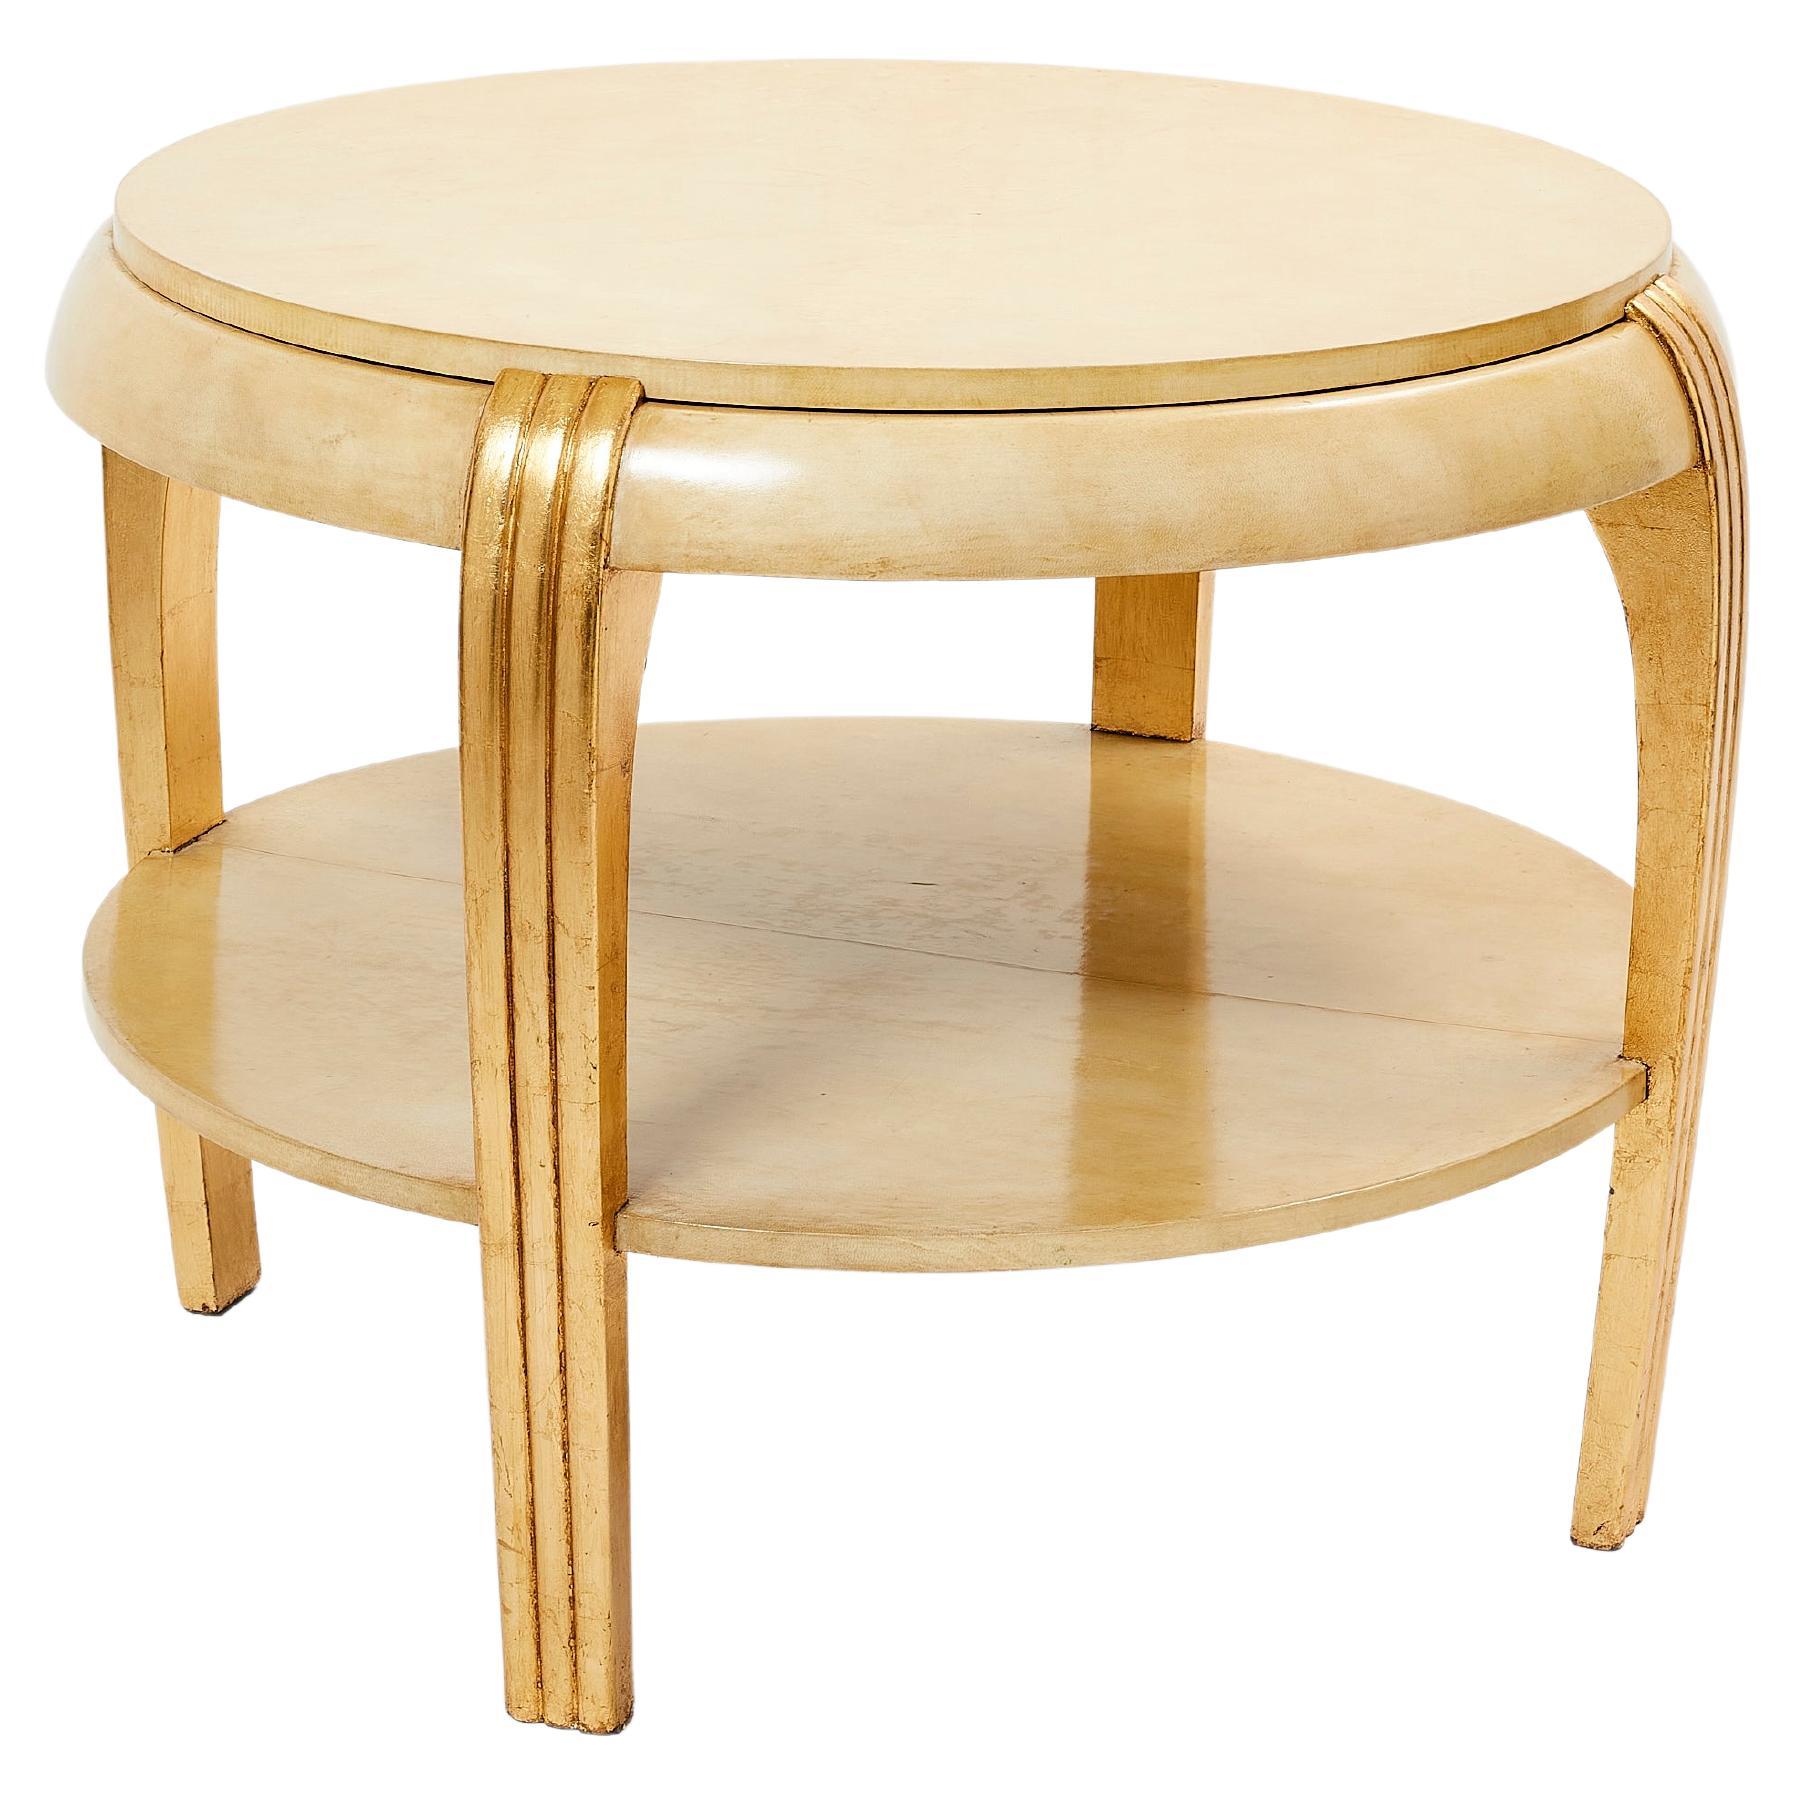 Attr. Maurice Dufrène Gilded Wood and Parchment gueridon table 1930s For Sale